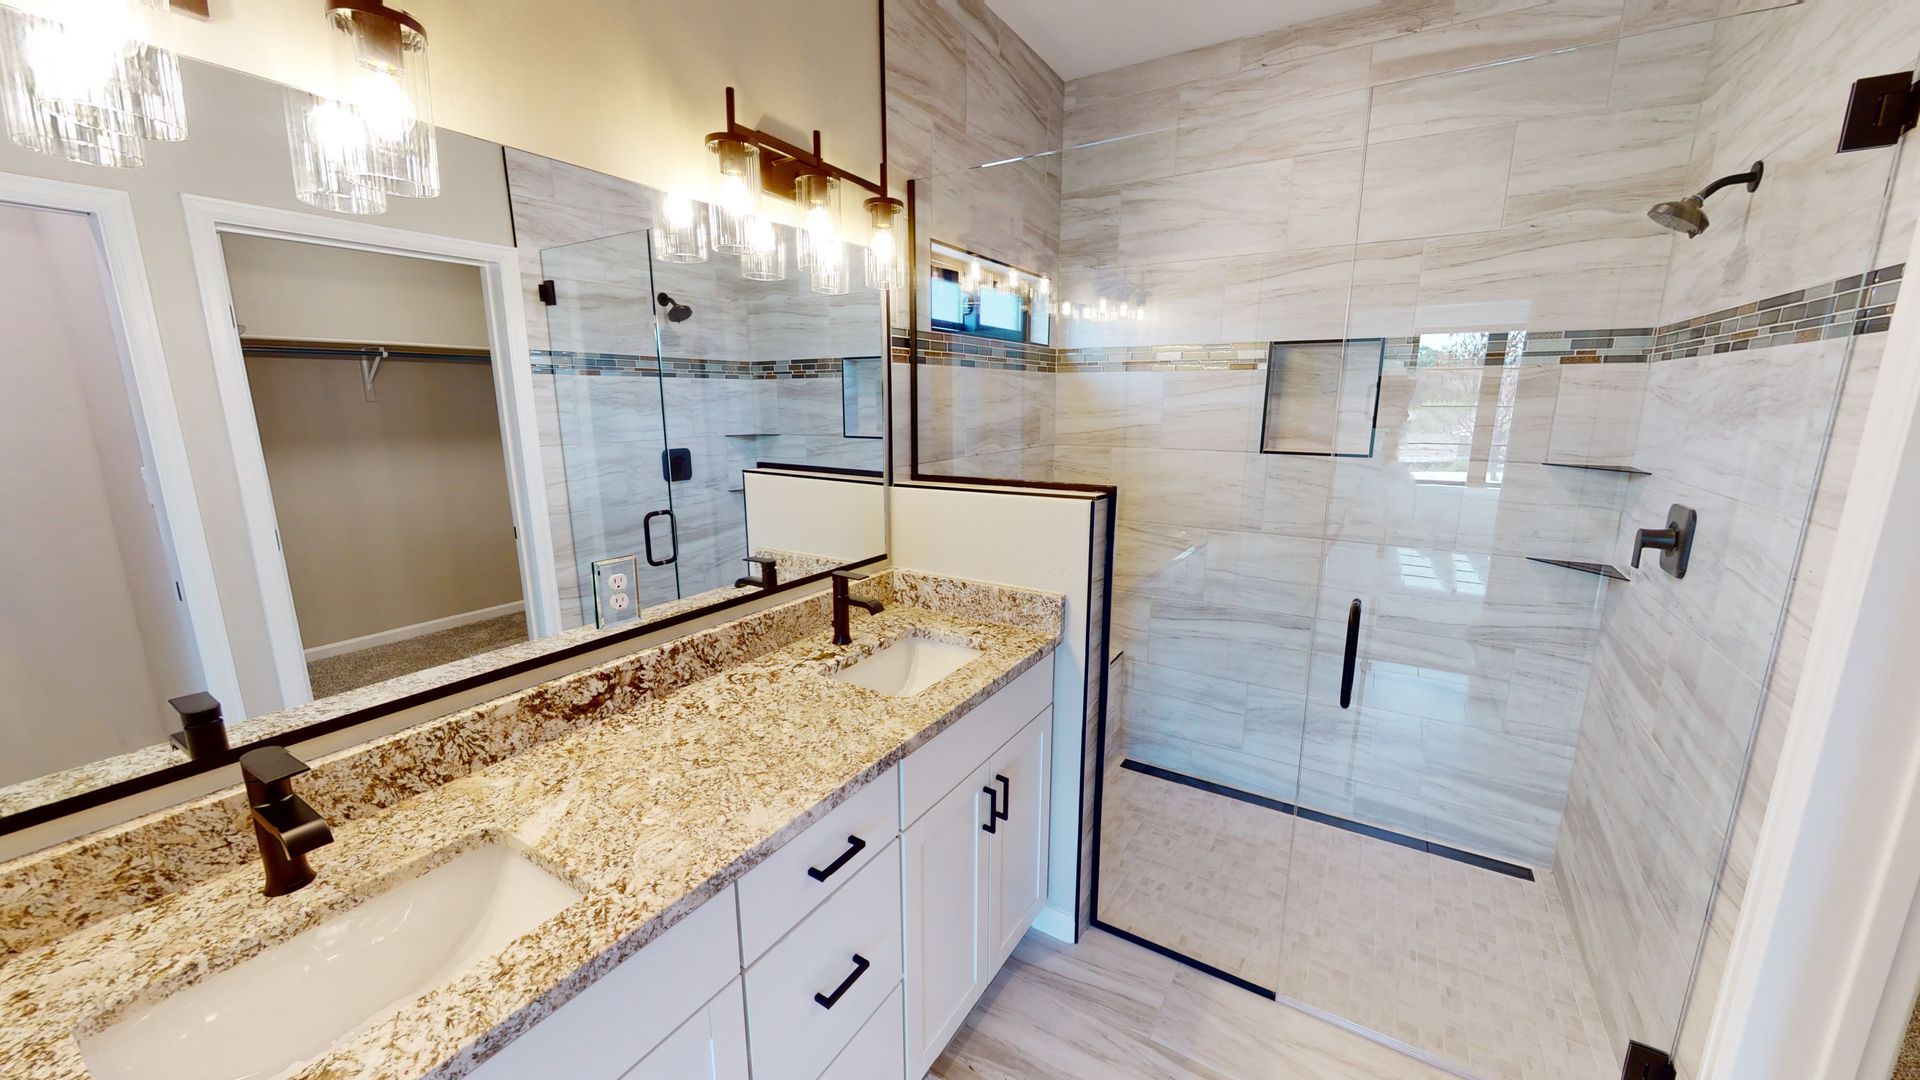 Contemporary bathroom design with double vanity and granite counters